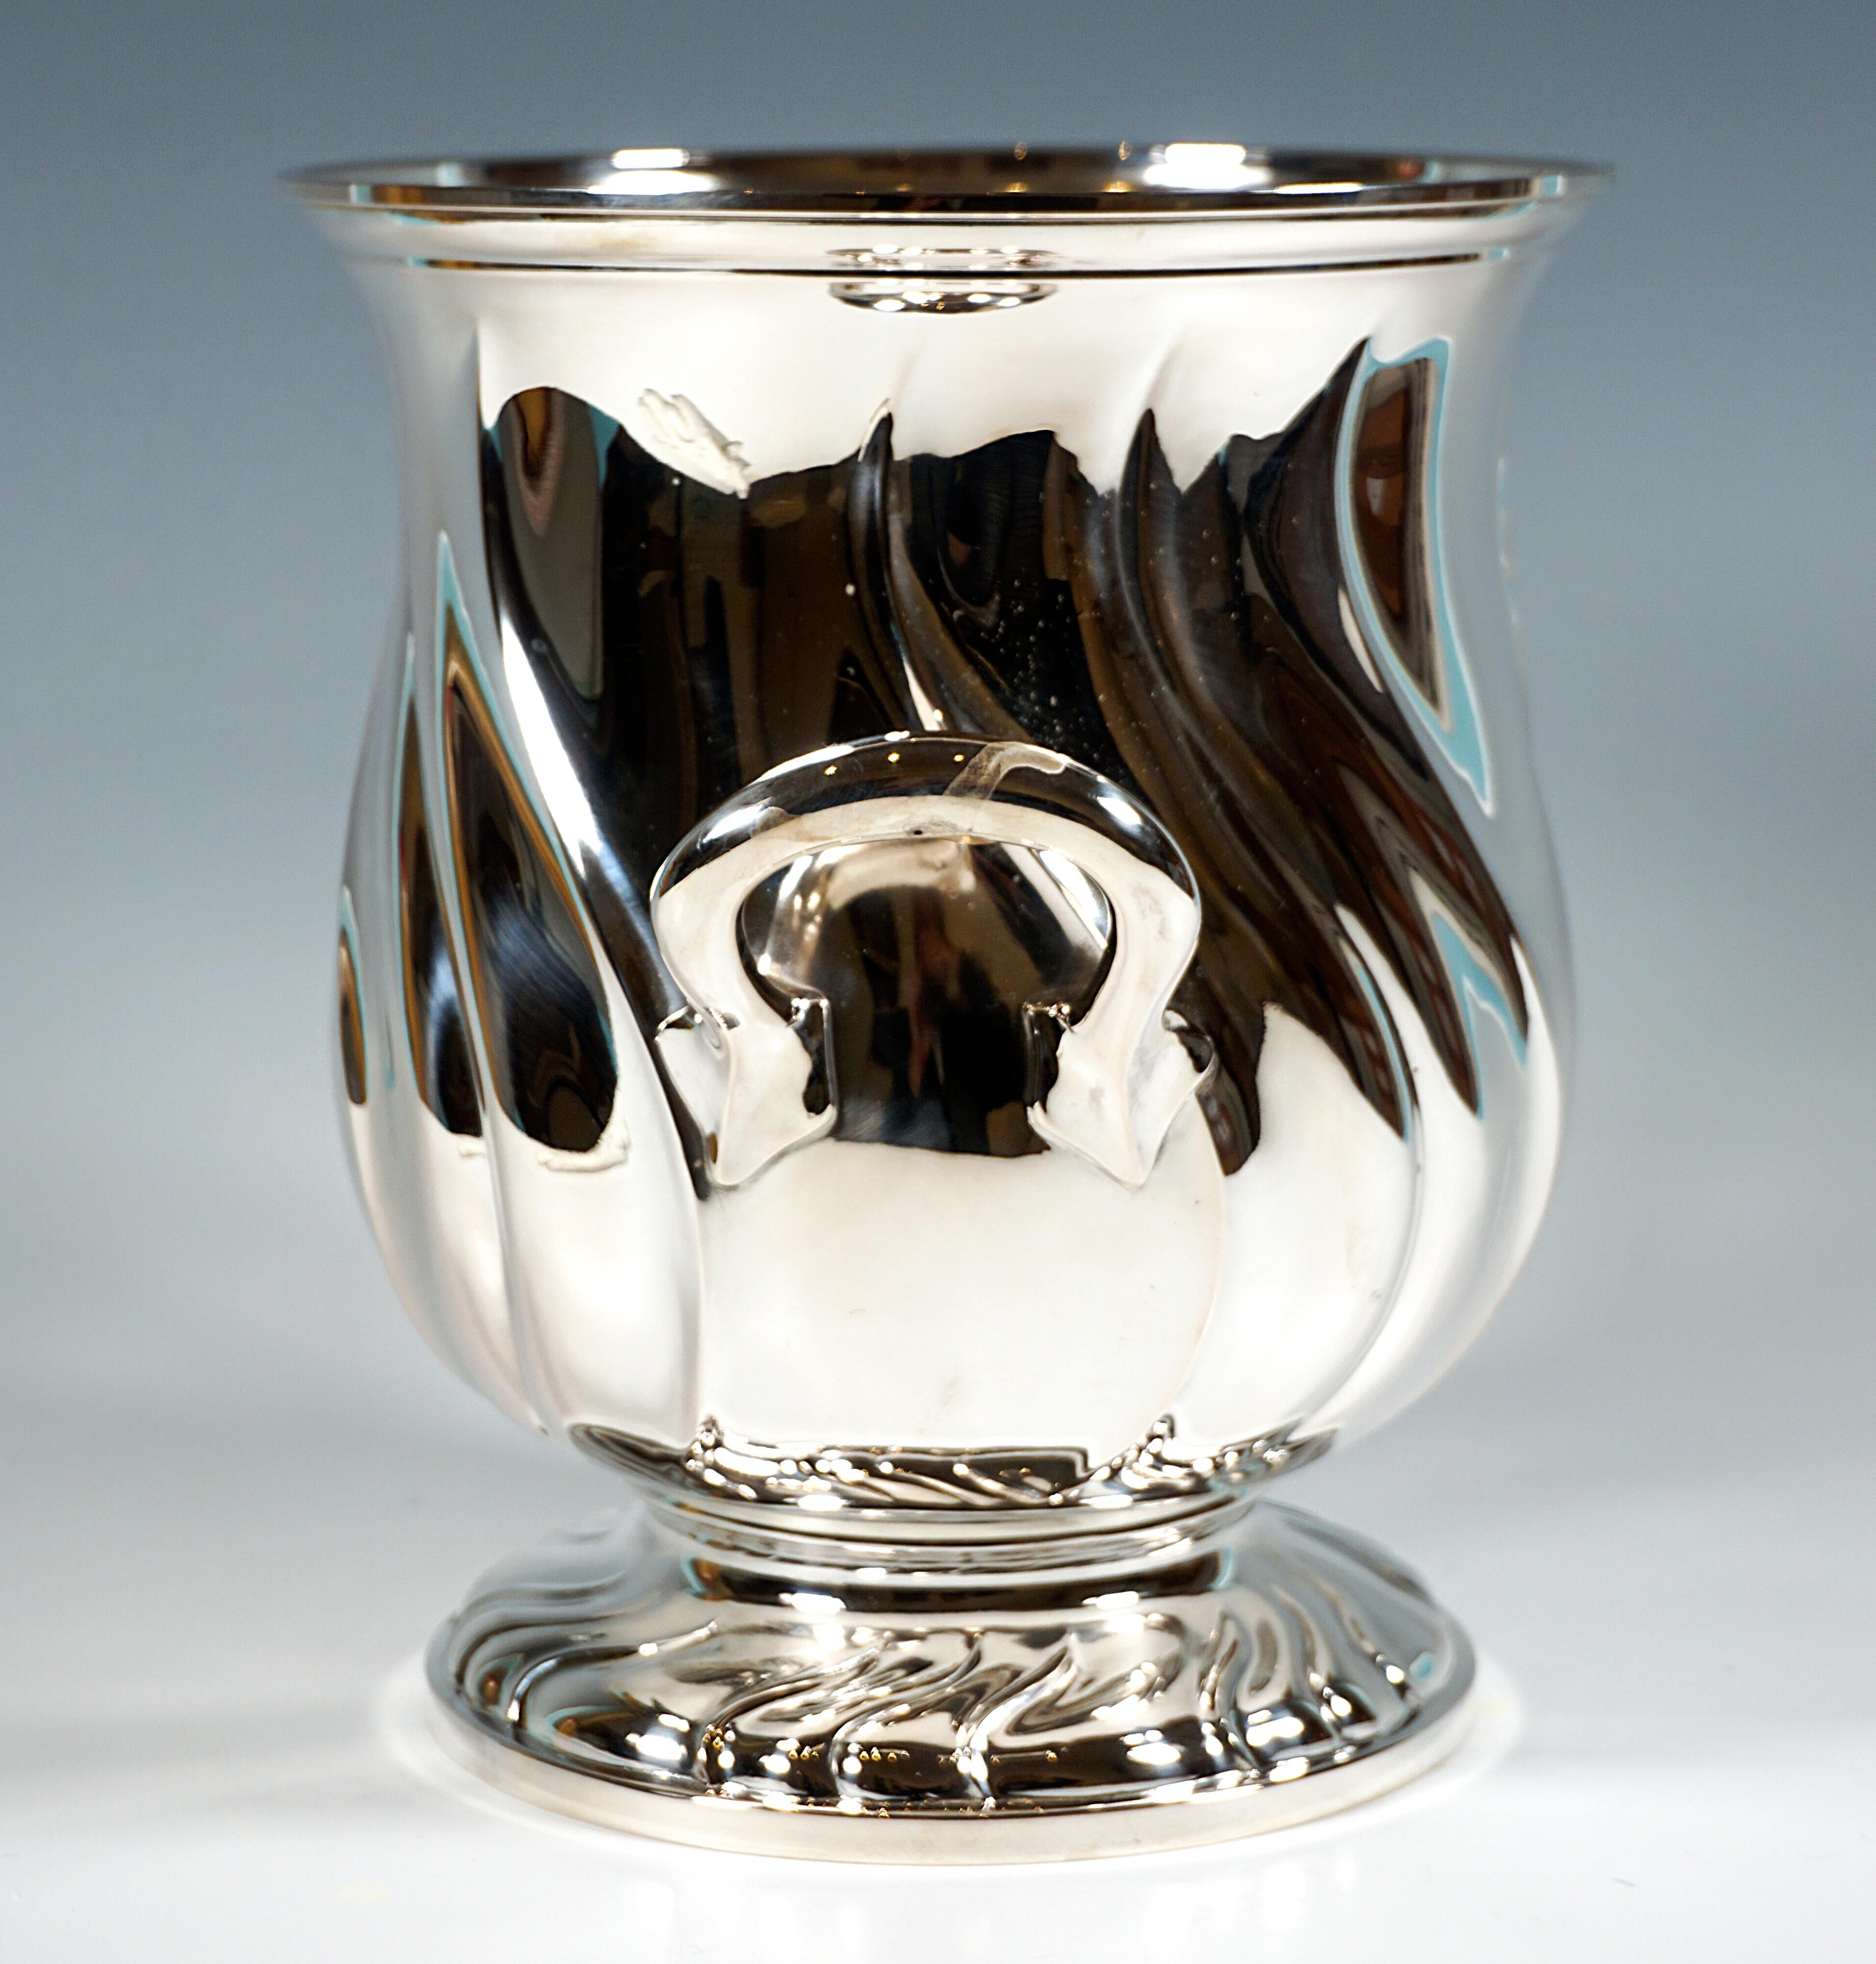 Elegant silver vessel in the shape of a tulip with a wide opening on a stepped stand, the wall and foot with curved triple folds, the rim profiled and turned outwards, two raised handles with a five-pointed finial in the lower, curved area.

-